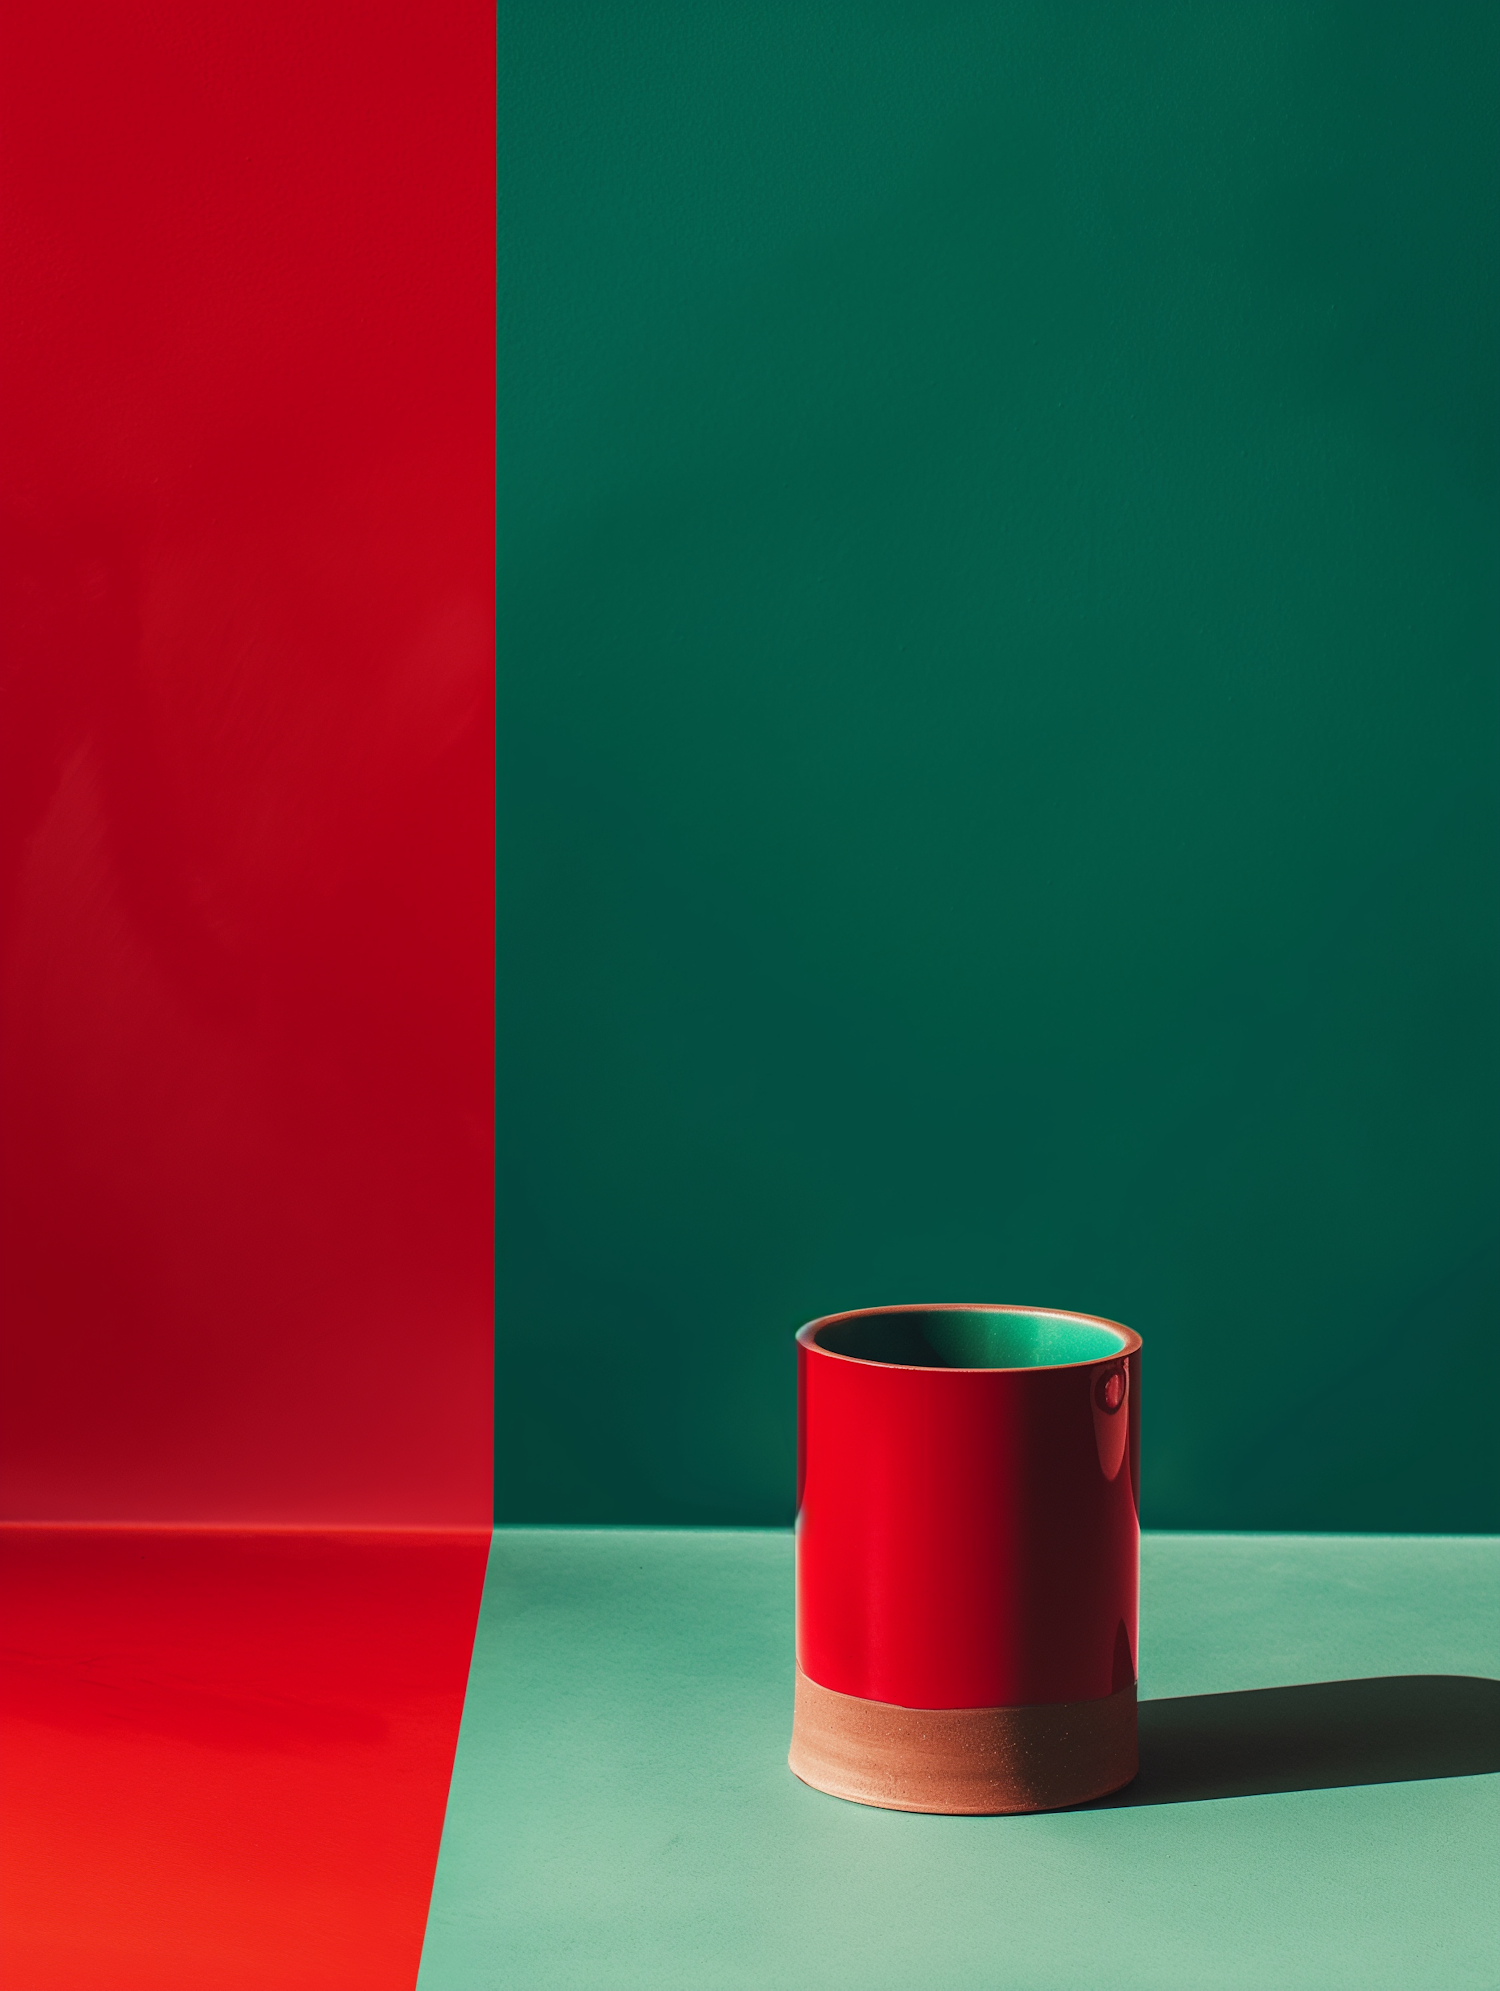 Minimalist Red and Green Background with Cup